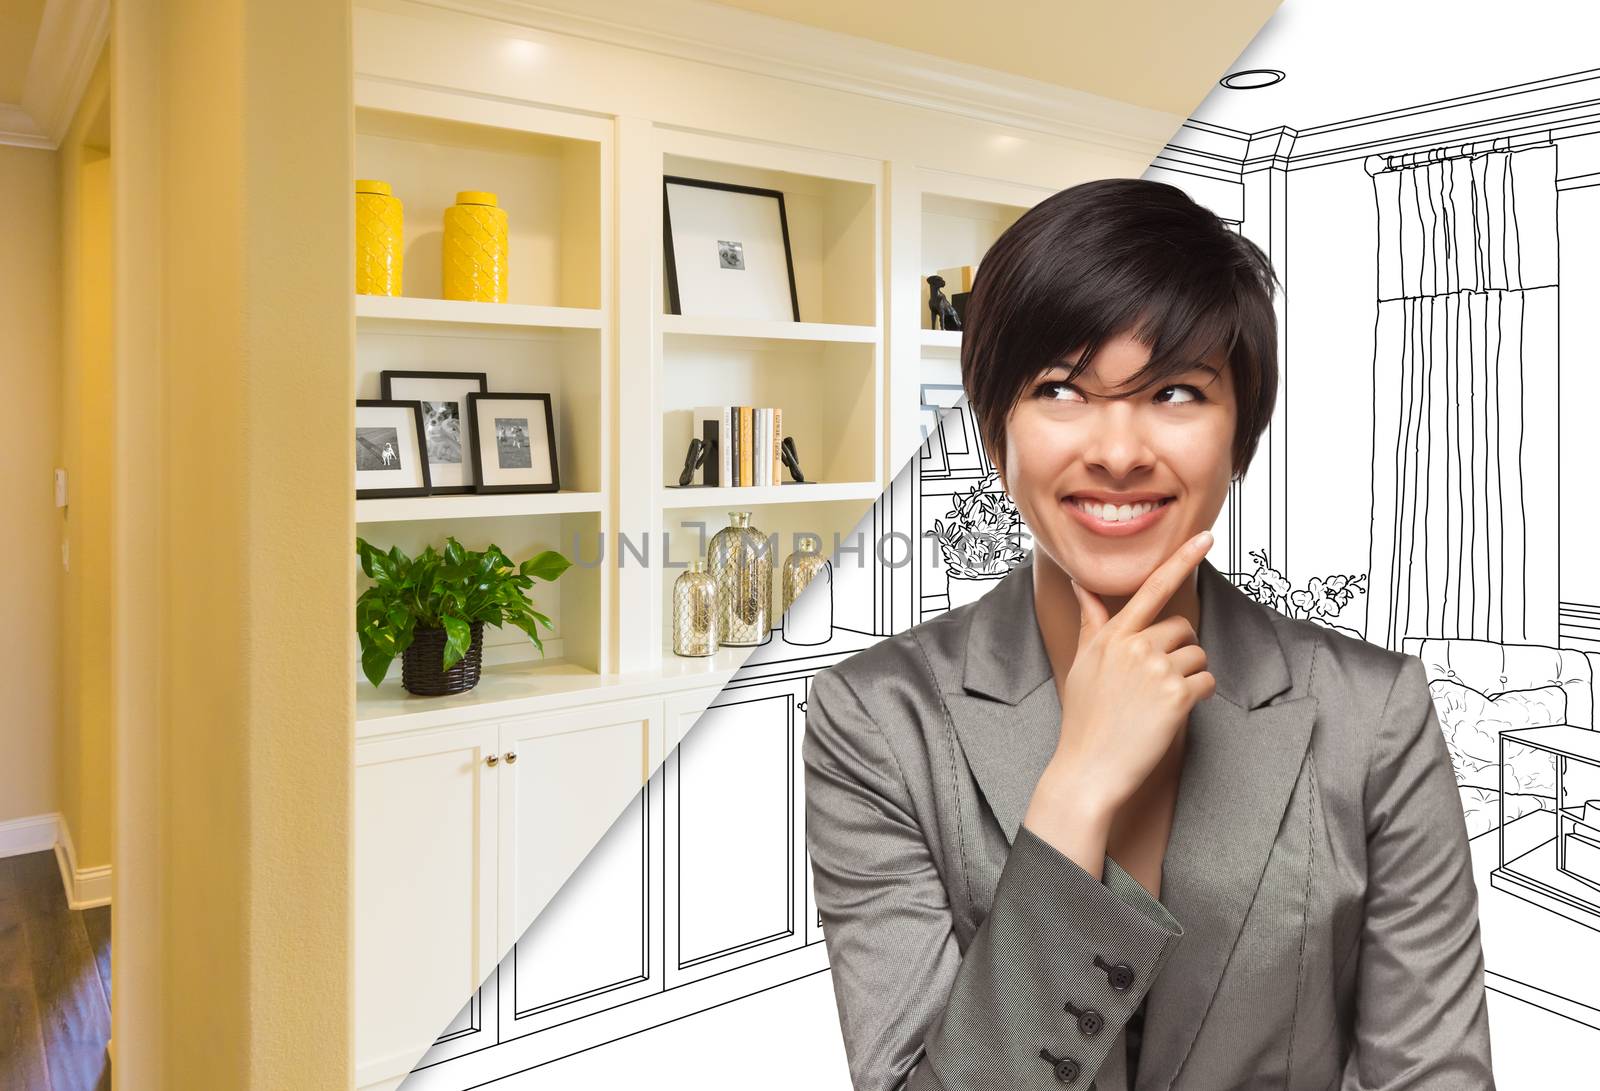 Young Woman Over Custom Built-in Shelves and Cabinets Design Drawing to Cross Section of Finished Photo. by Feverpitched